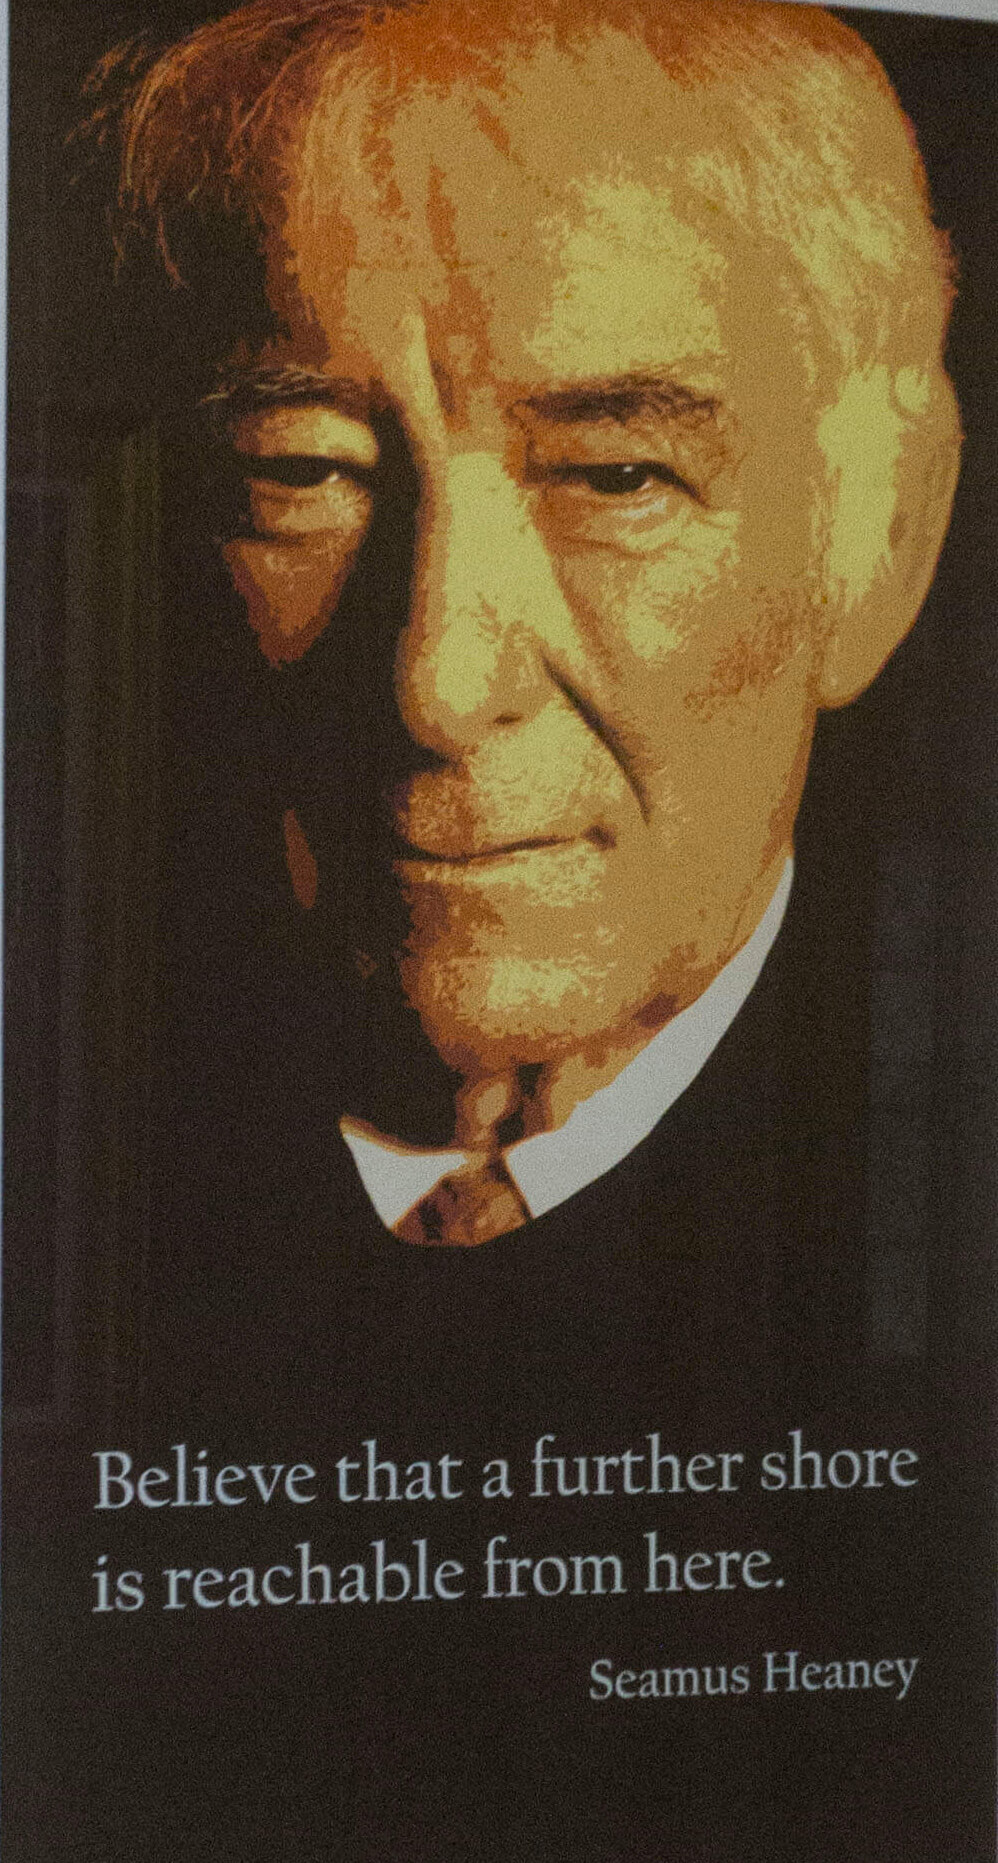 Portraits of Seamus Heaney and C S Lewis